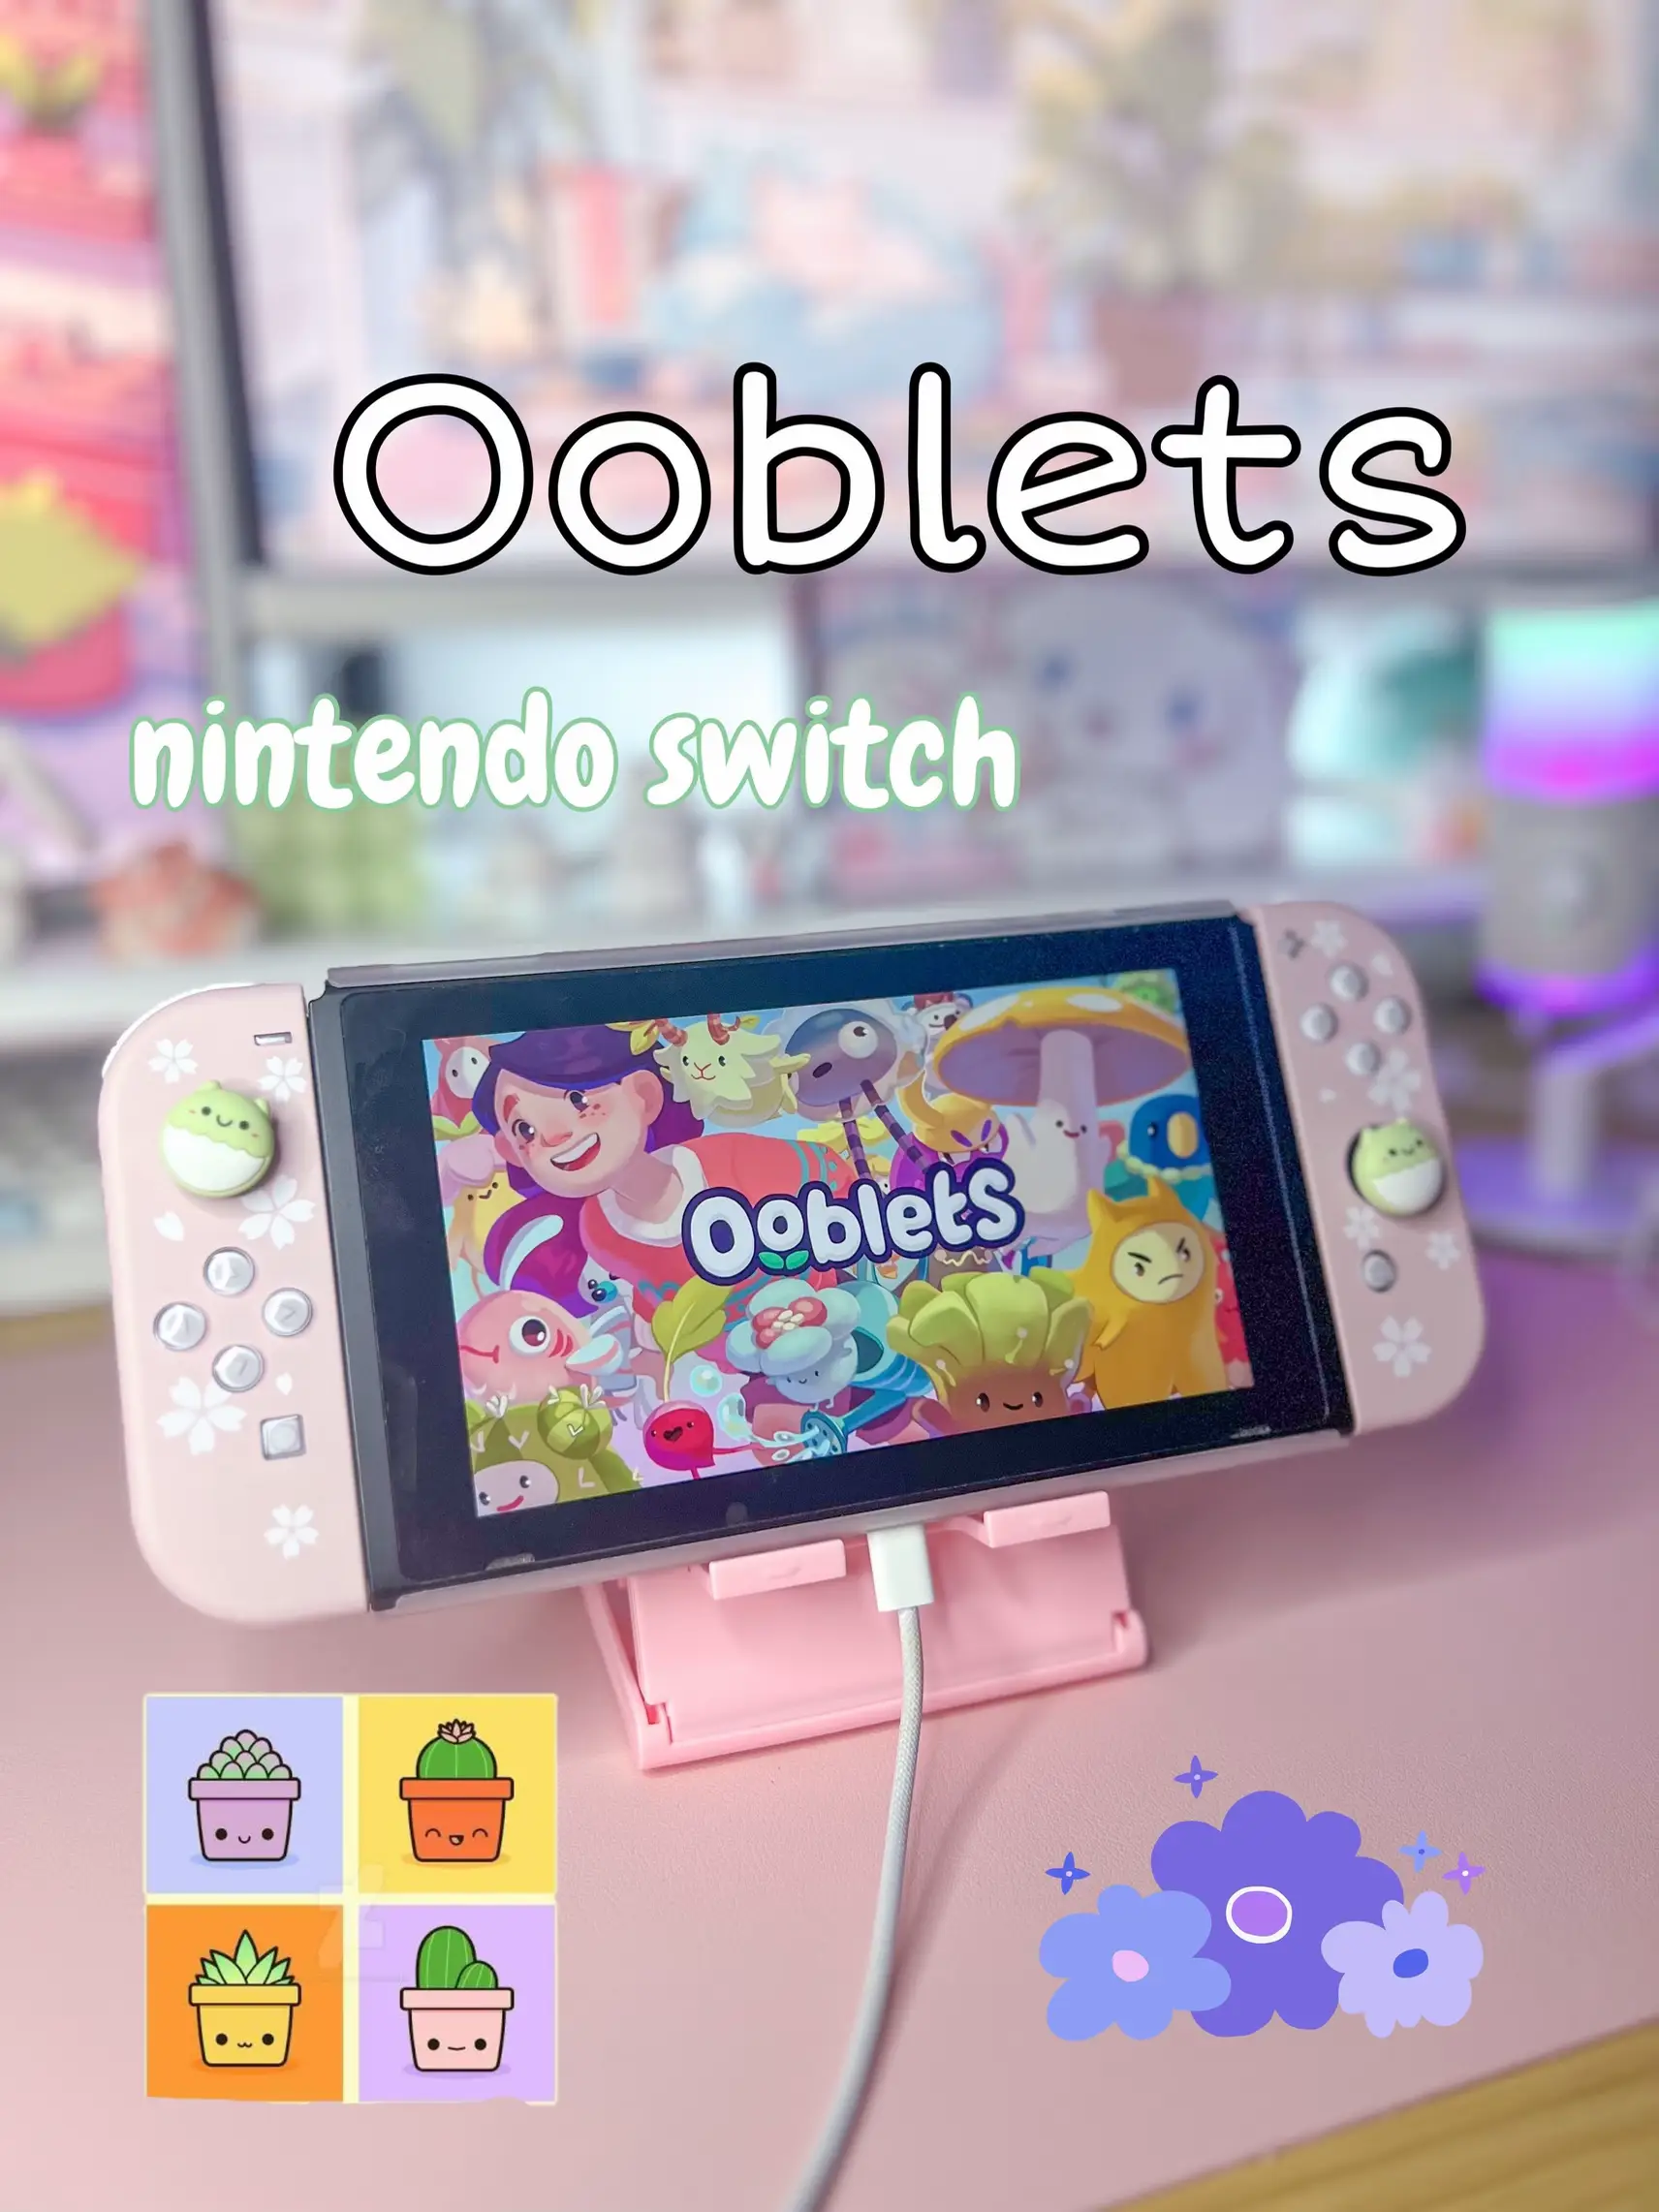 ooblets nintendo switch | Gallery posted by nikki | Lemon8